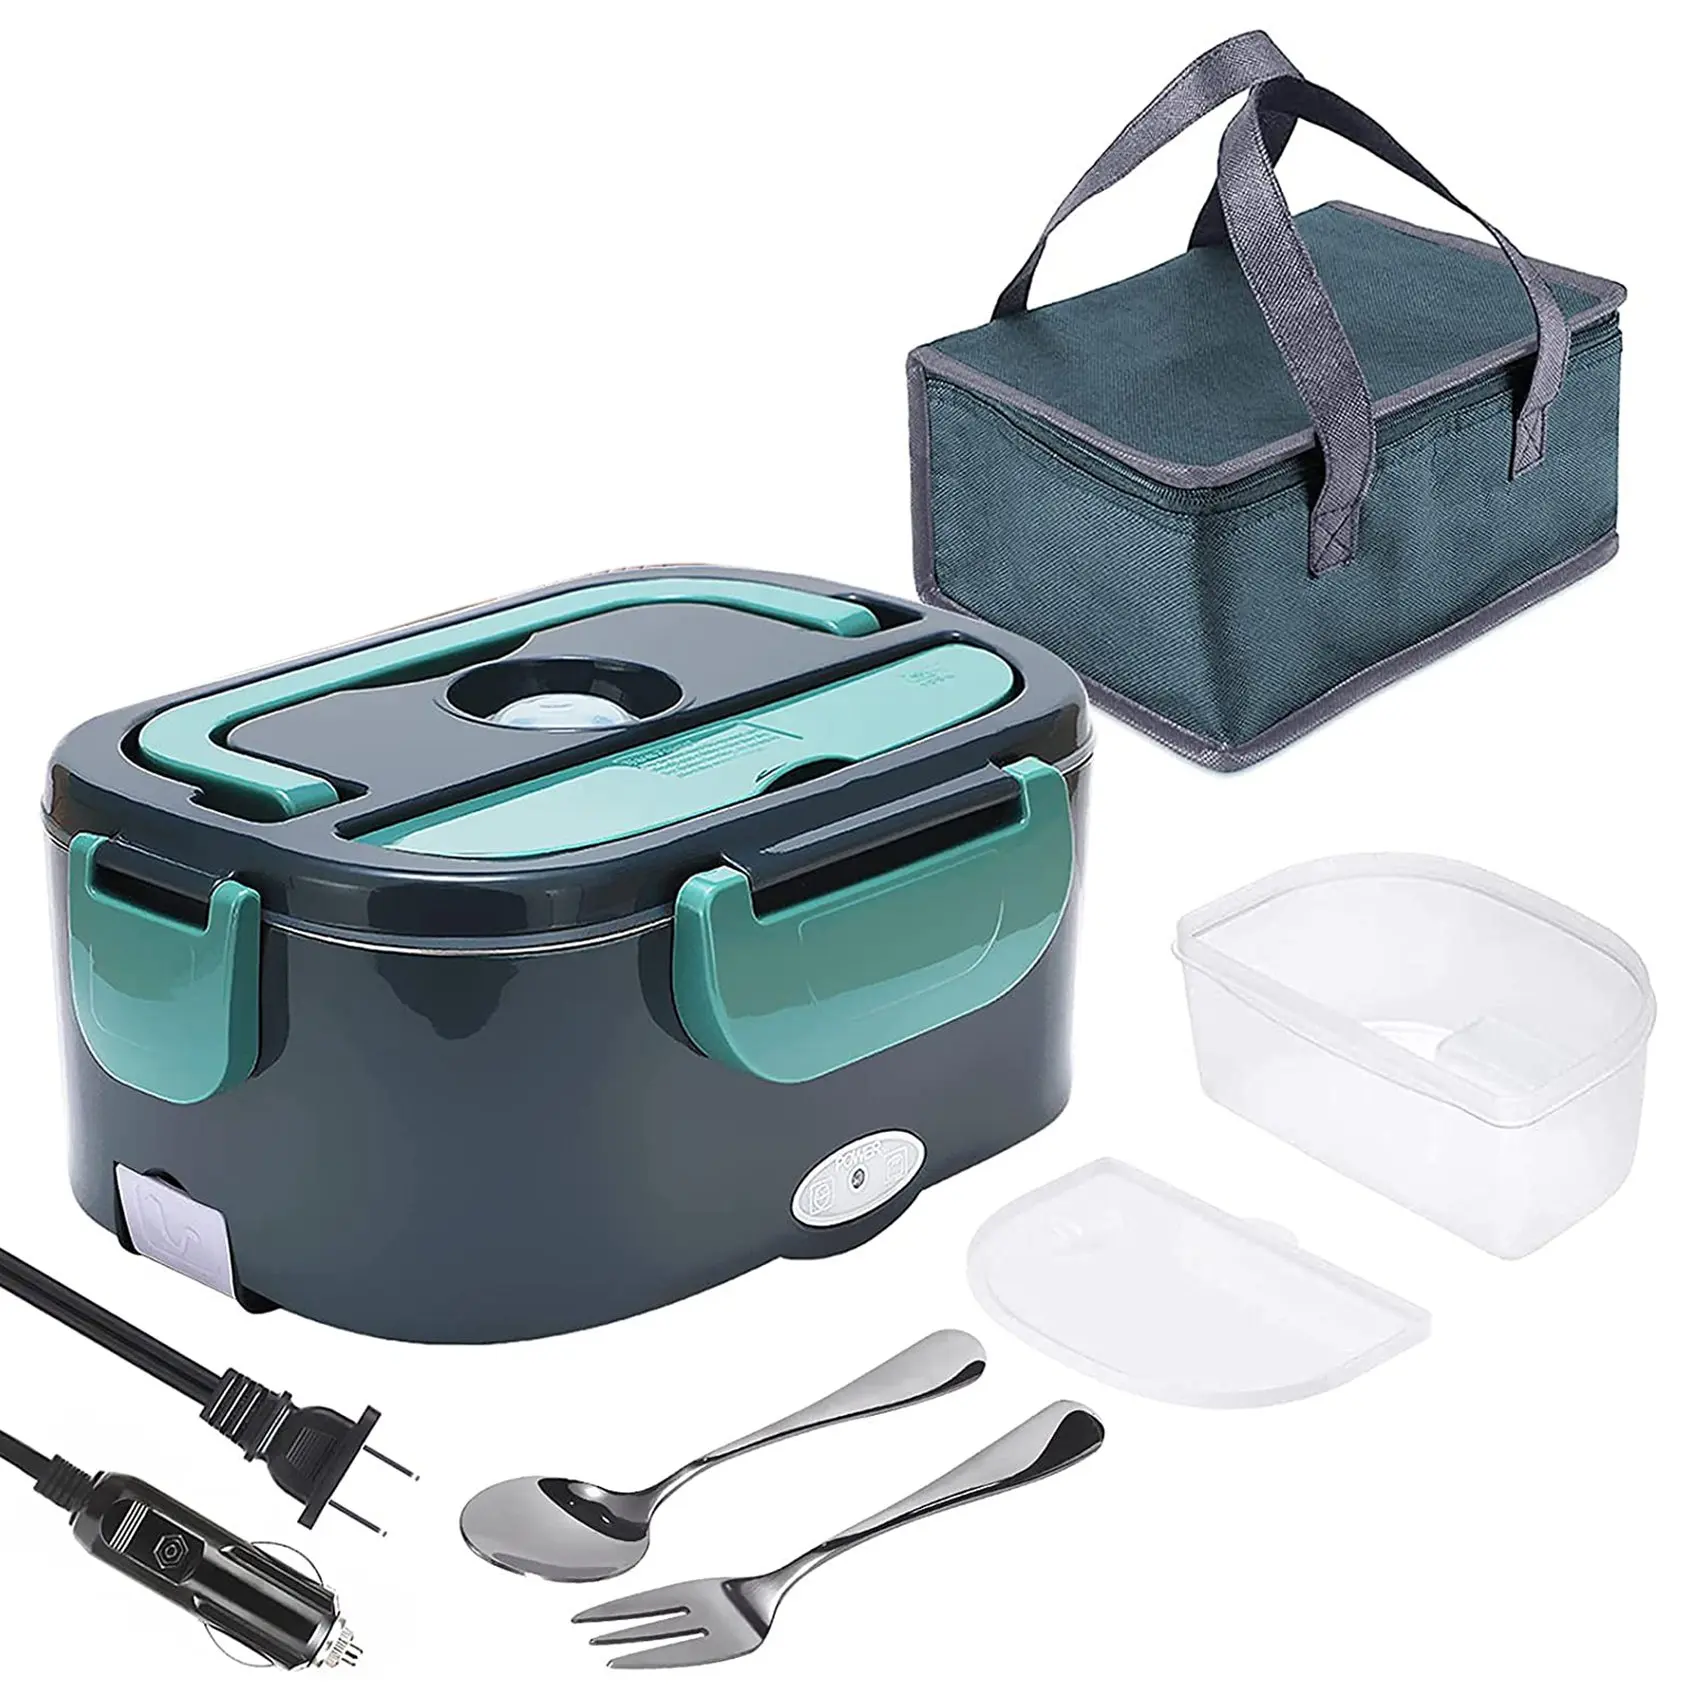 

Electric Lunch Box,2 in 1 Portable Food Warmer Heater Lunch Box for Car,Work,Home & Office- Capacity 1.5L US Plug Green